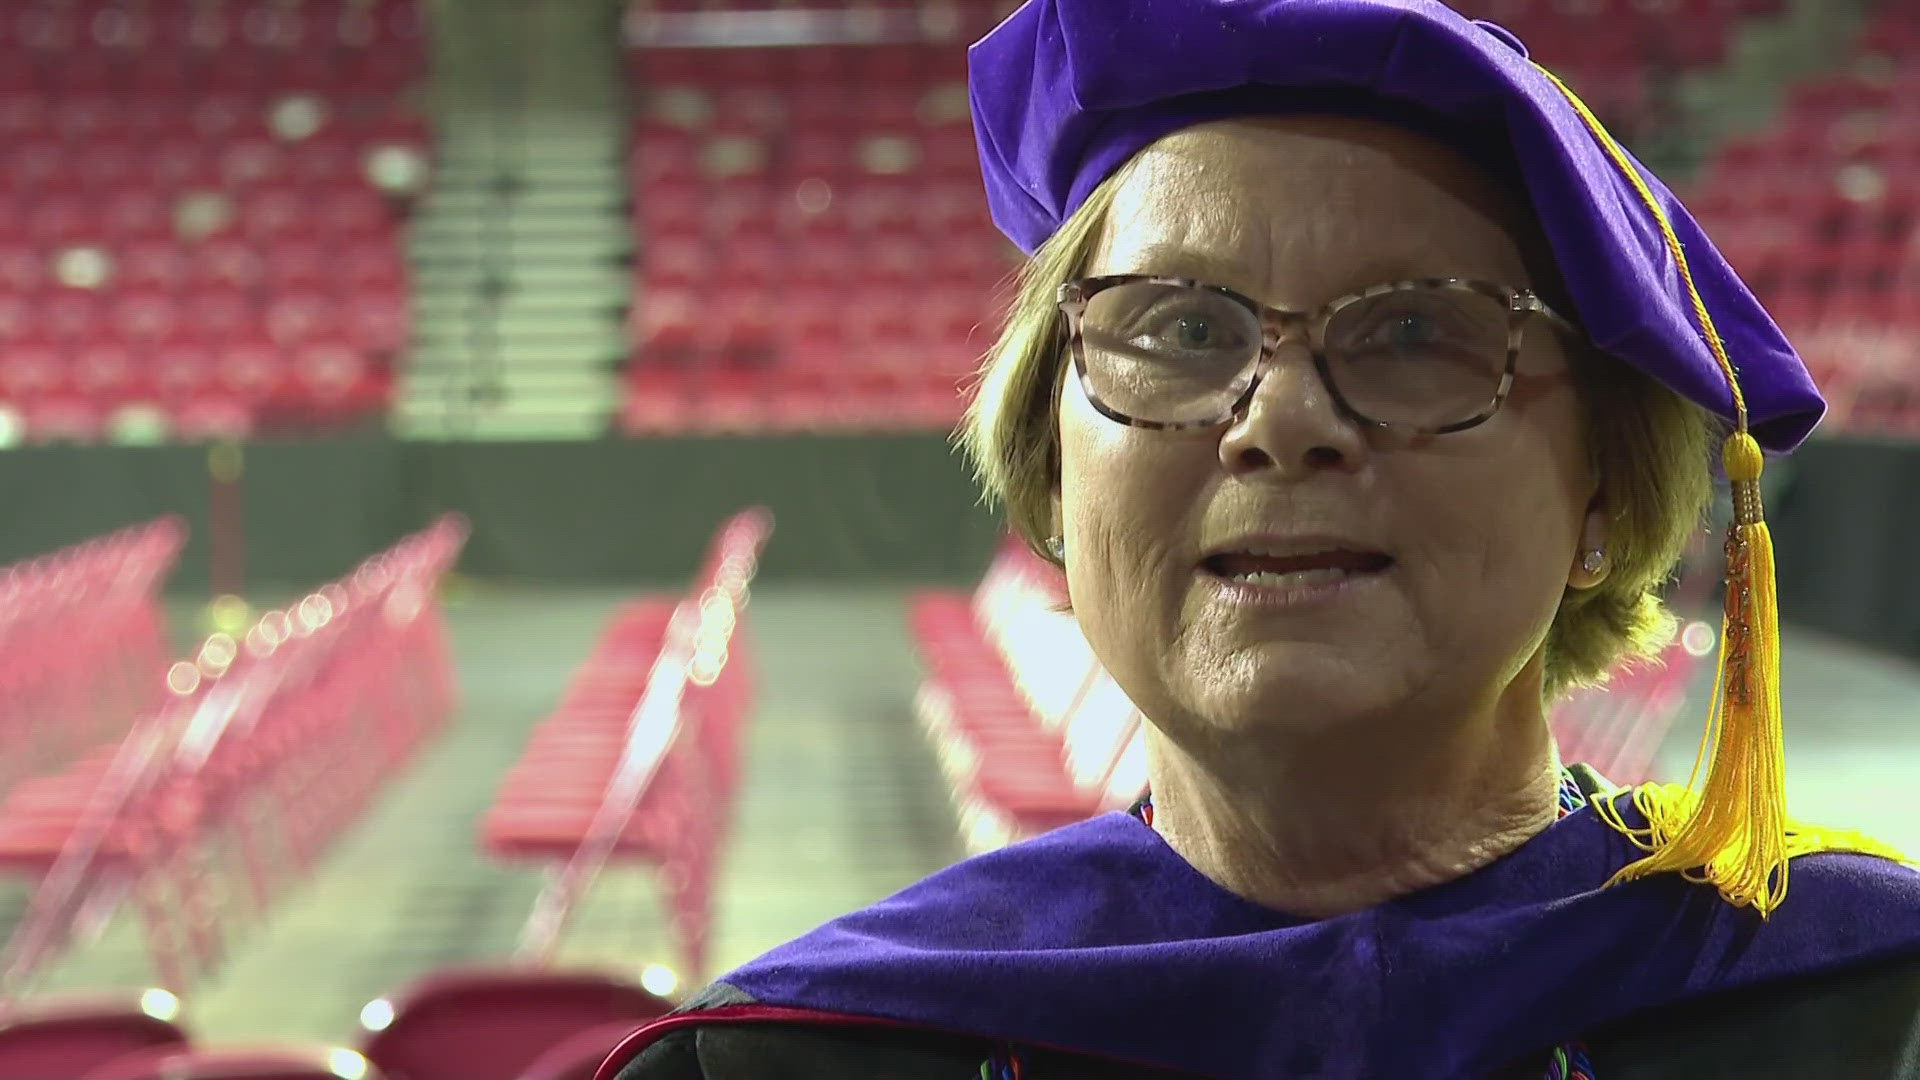 At 64, Susan Canny hopes her story inspires others to pursue their dreams, regardless of age.